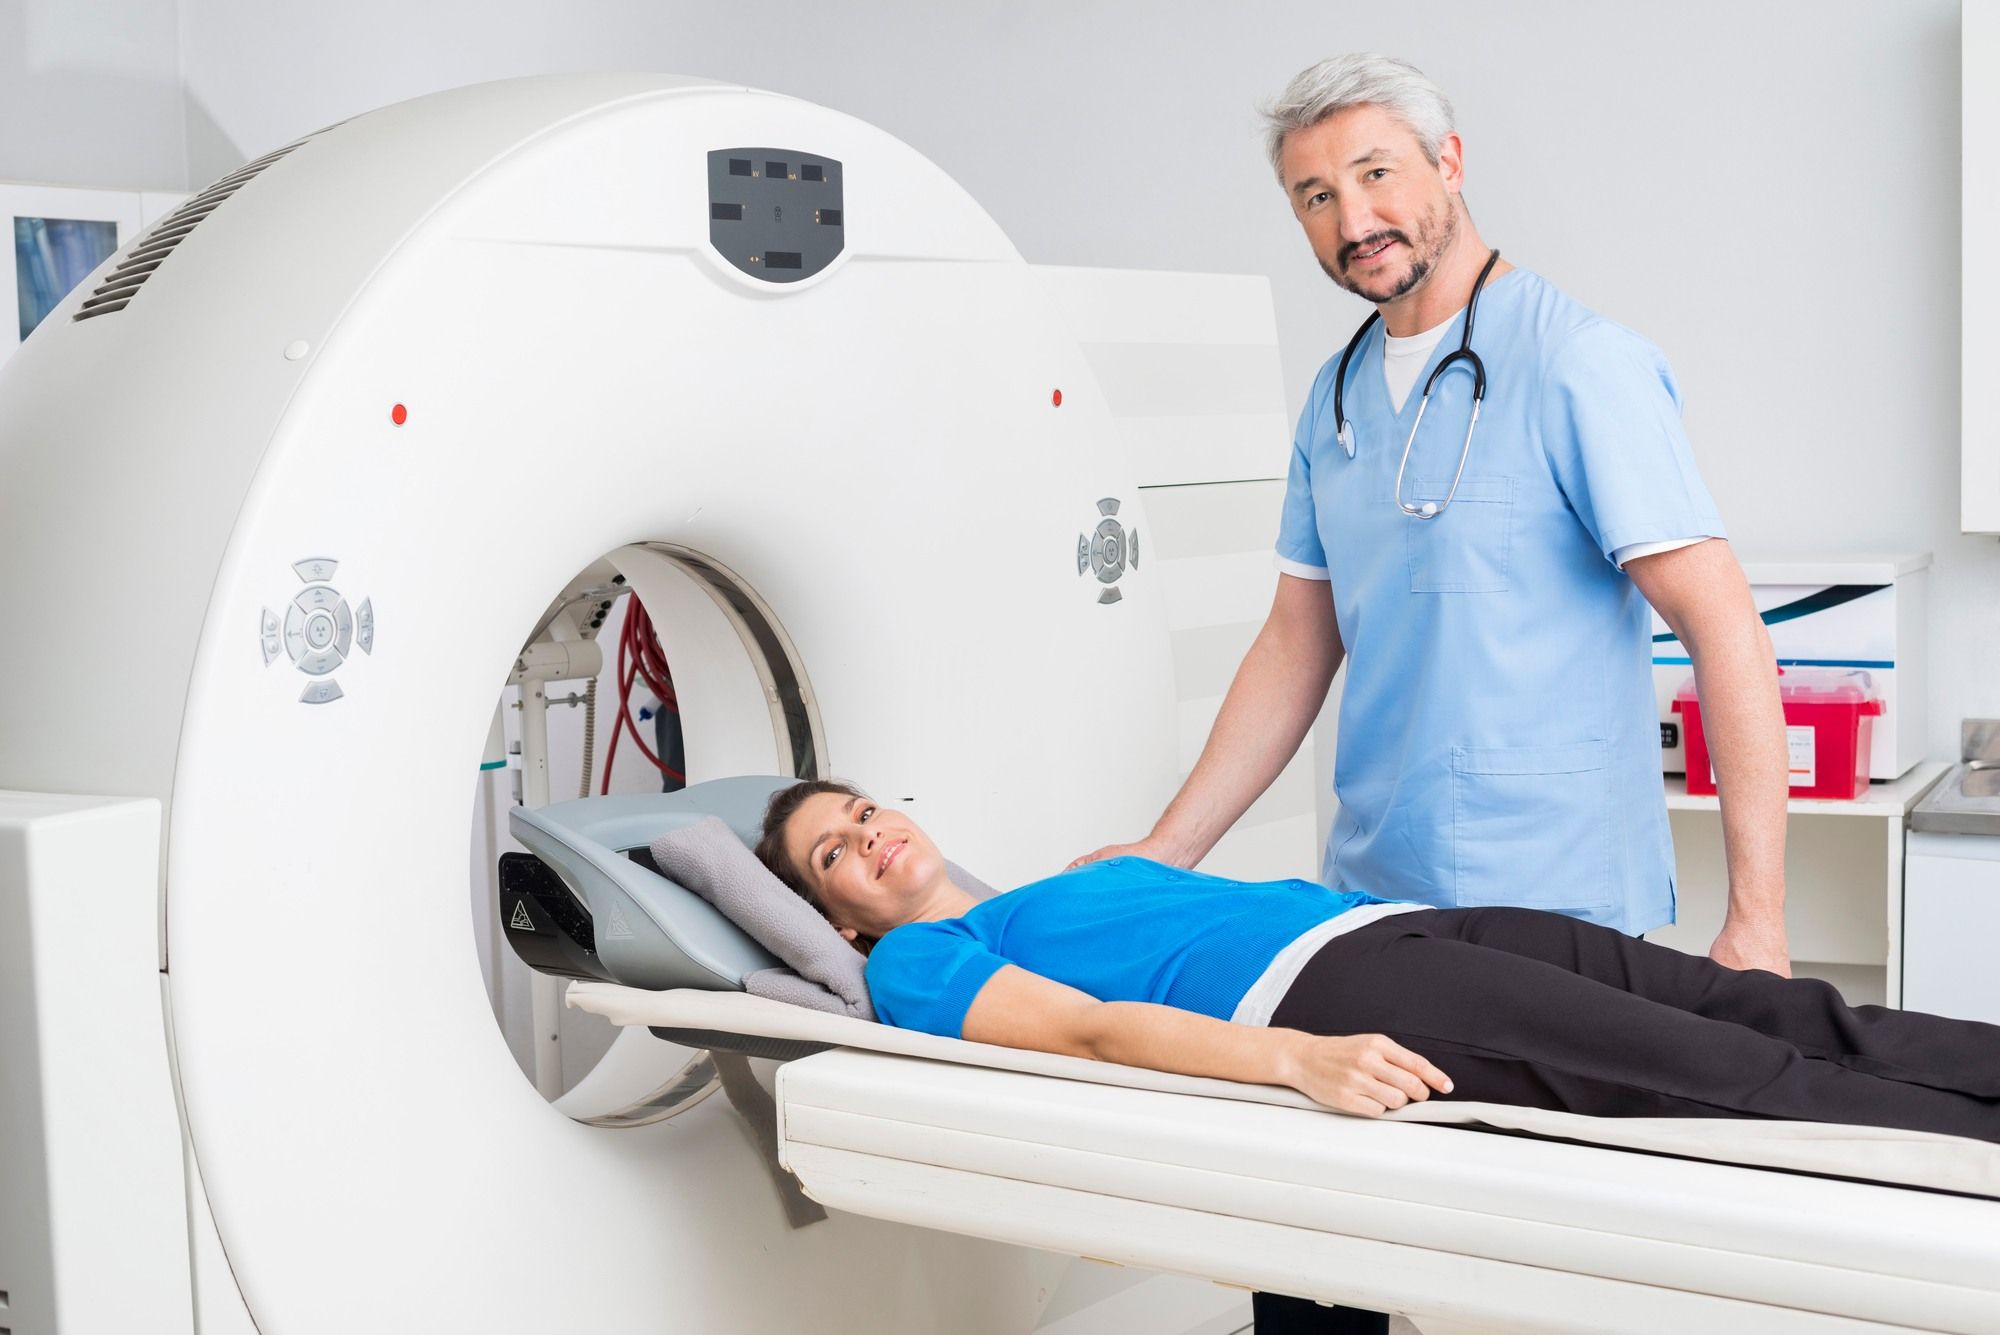 Male doctor stands next to female patient who is on MRI machine